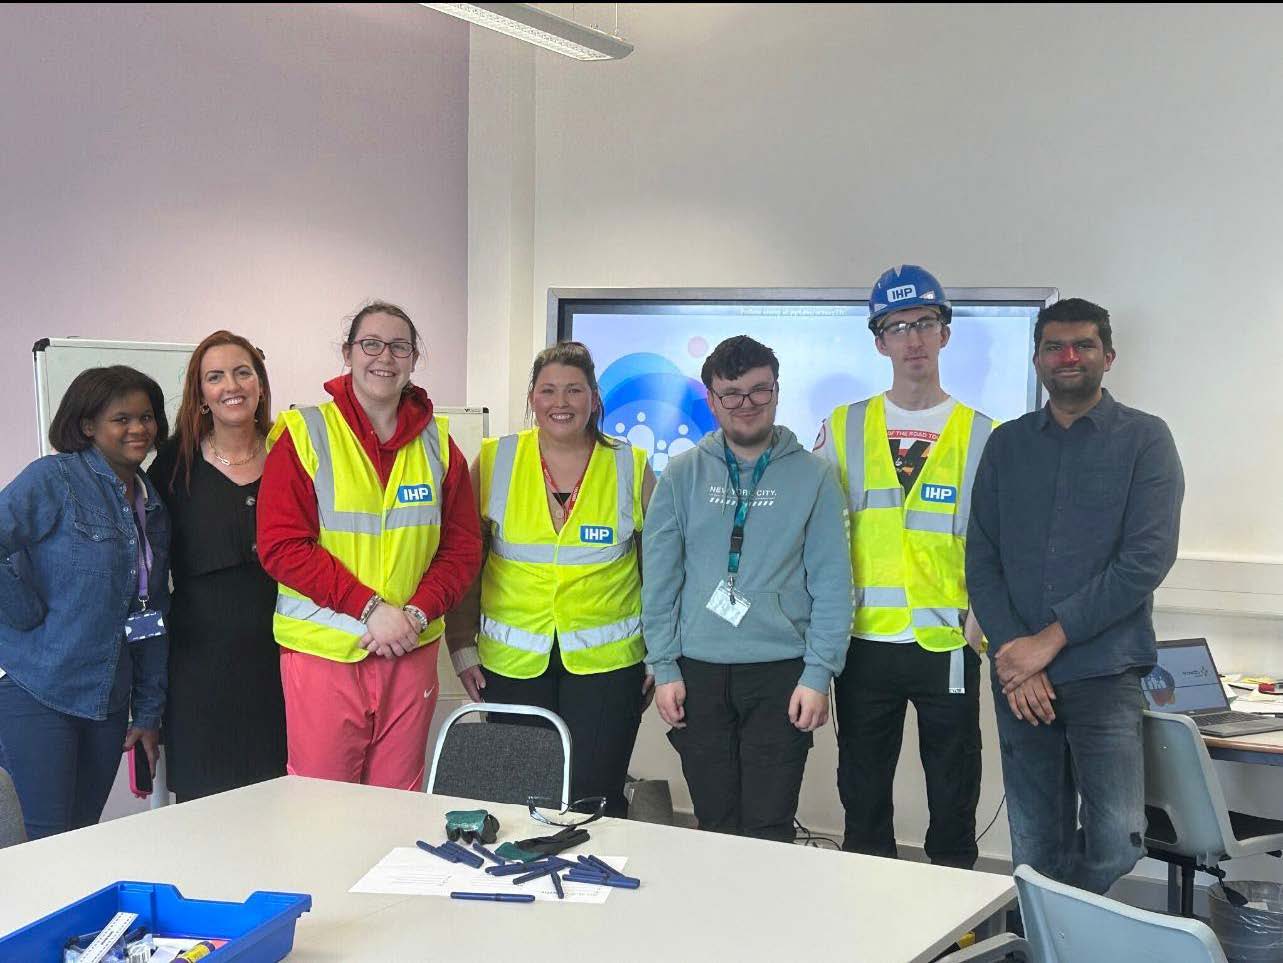 The Midlands Collaborative Working Group, created and delivered presentations about site safety and early careers information in sites across the Midlands.